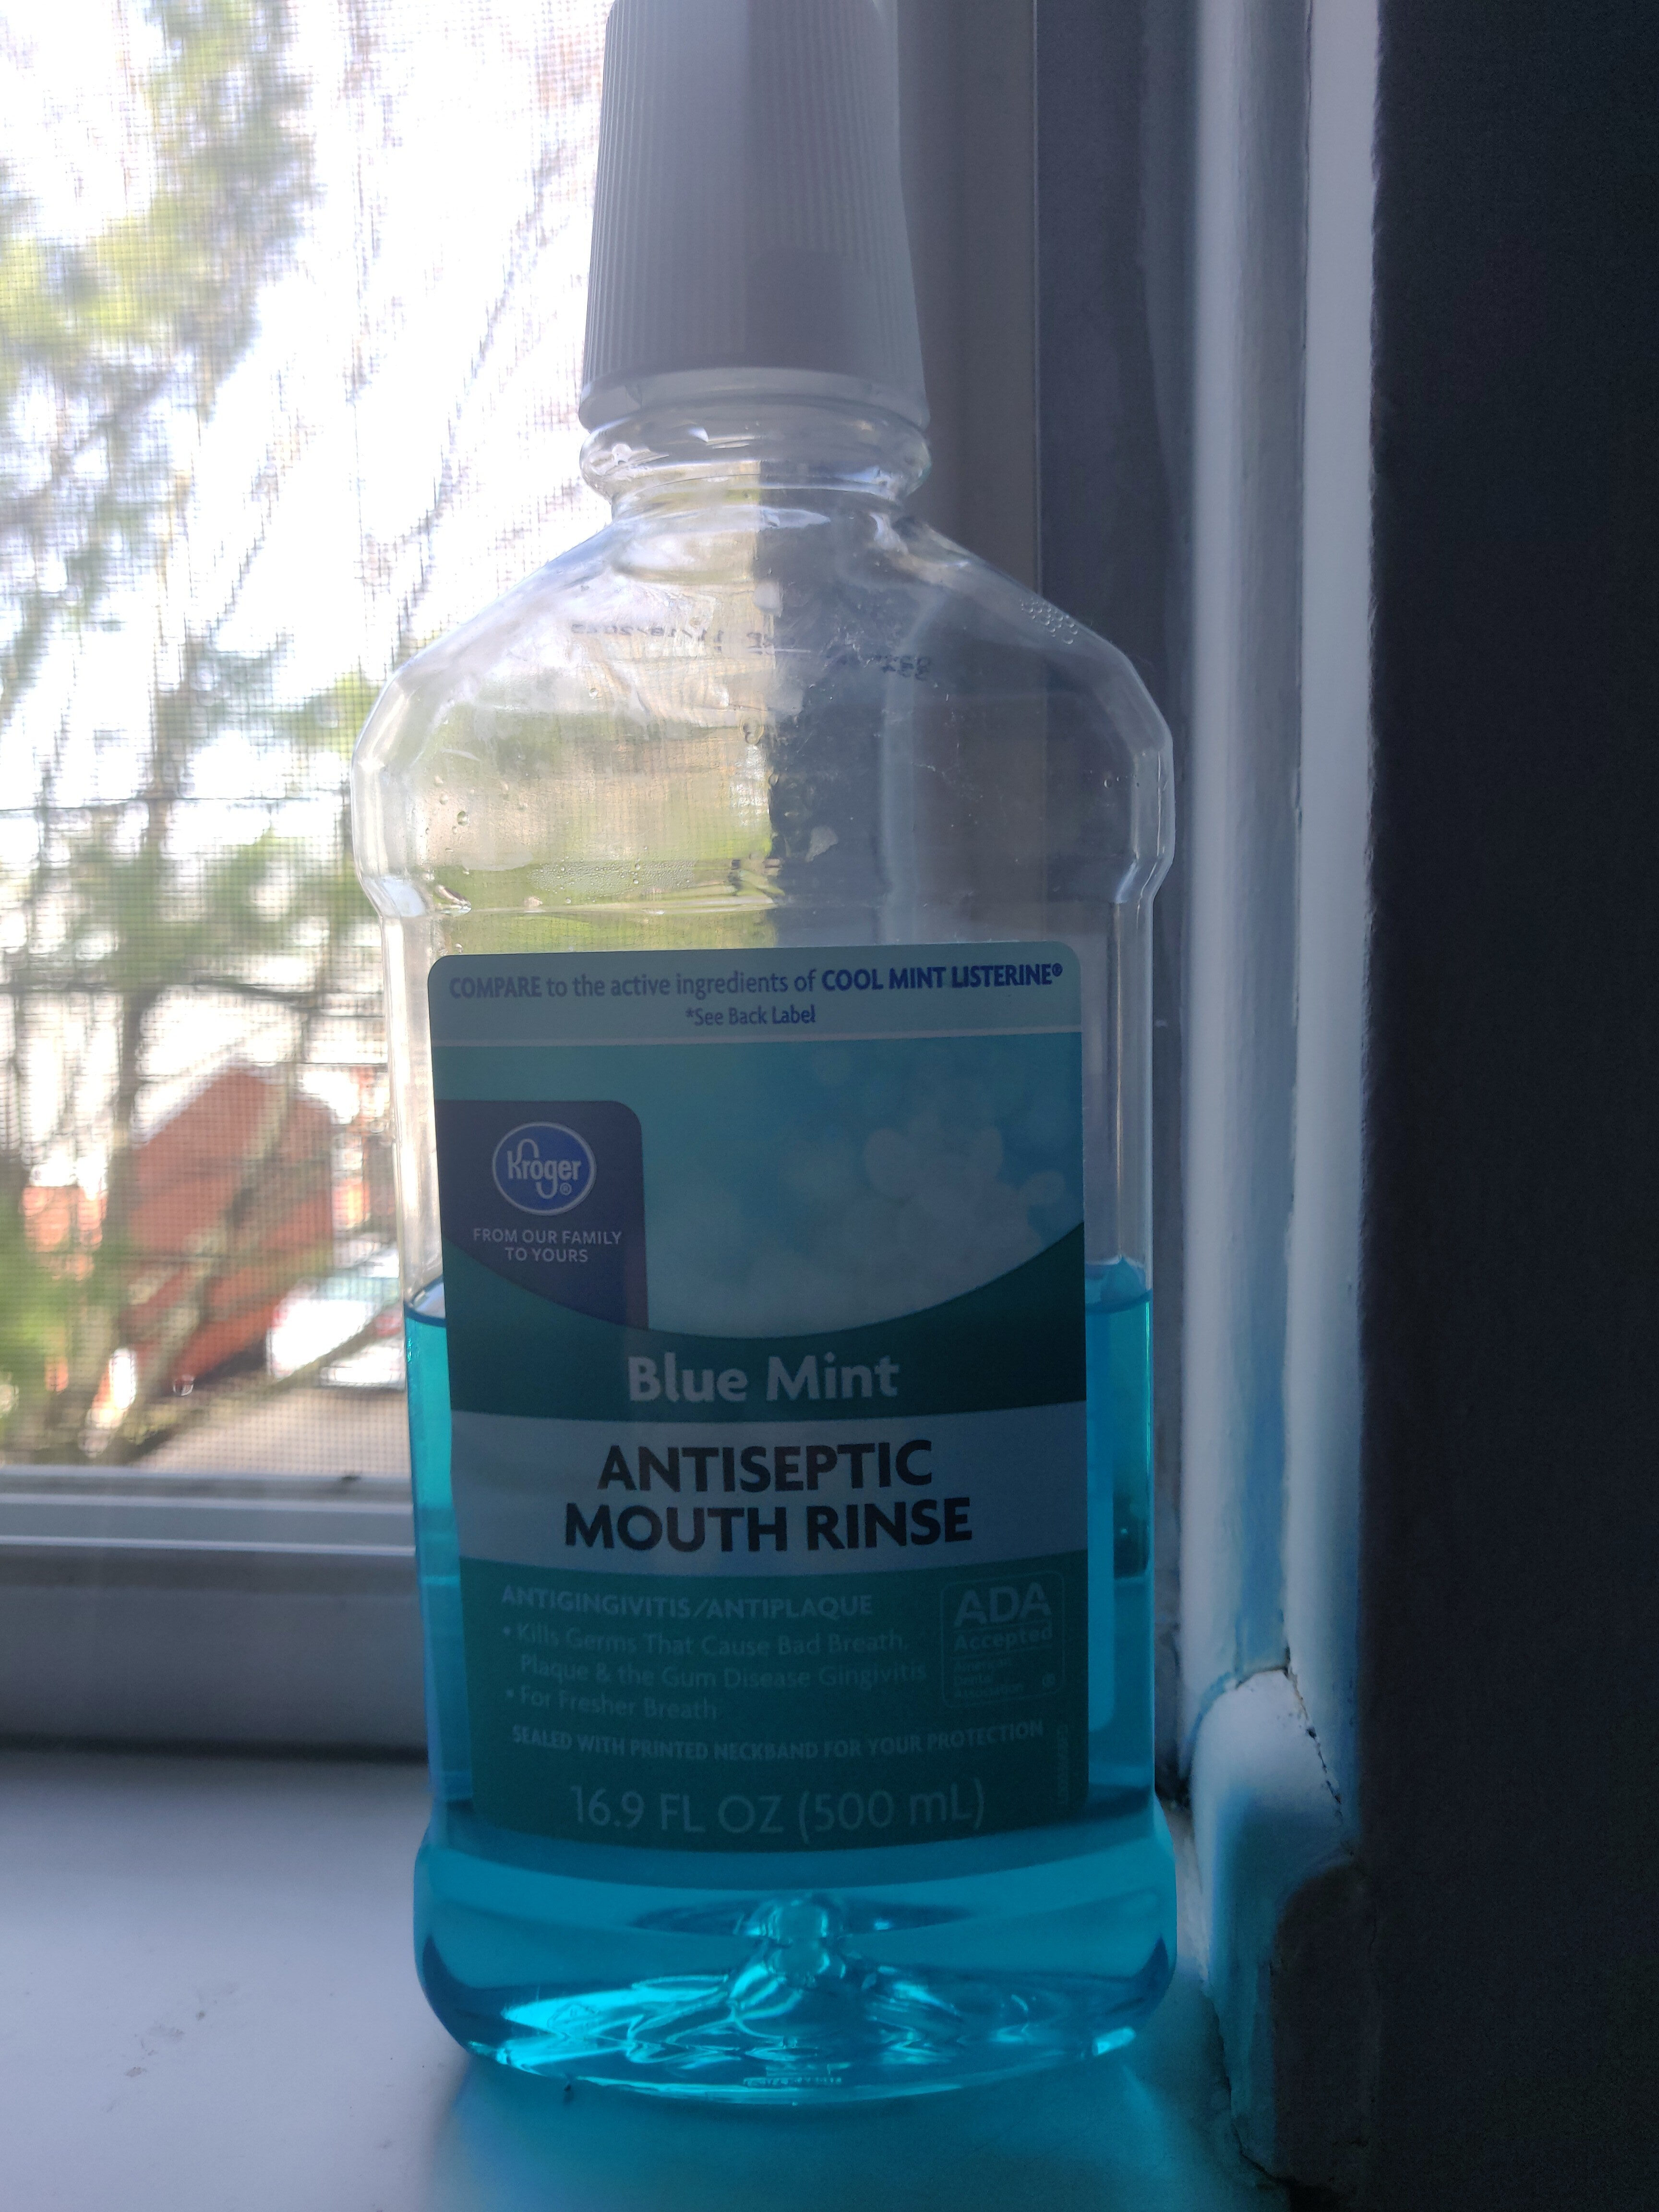 Antiseptic Mouth Rinse - Tuote - en